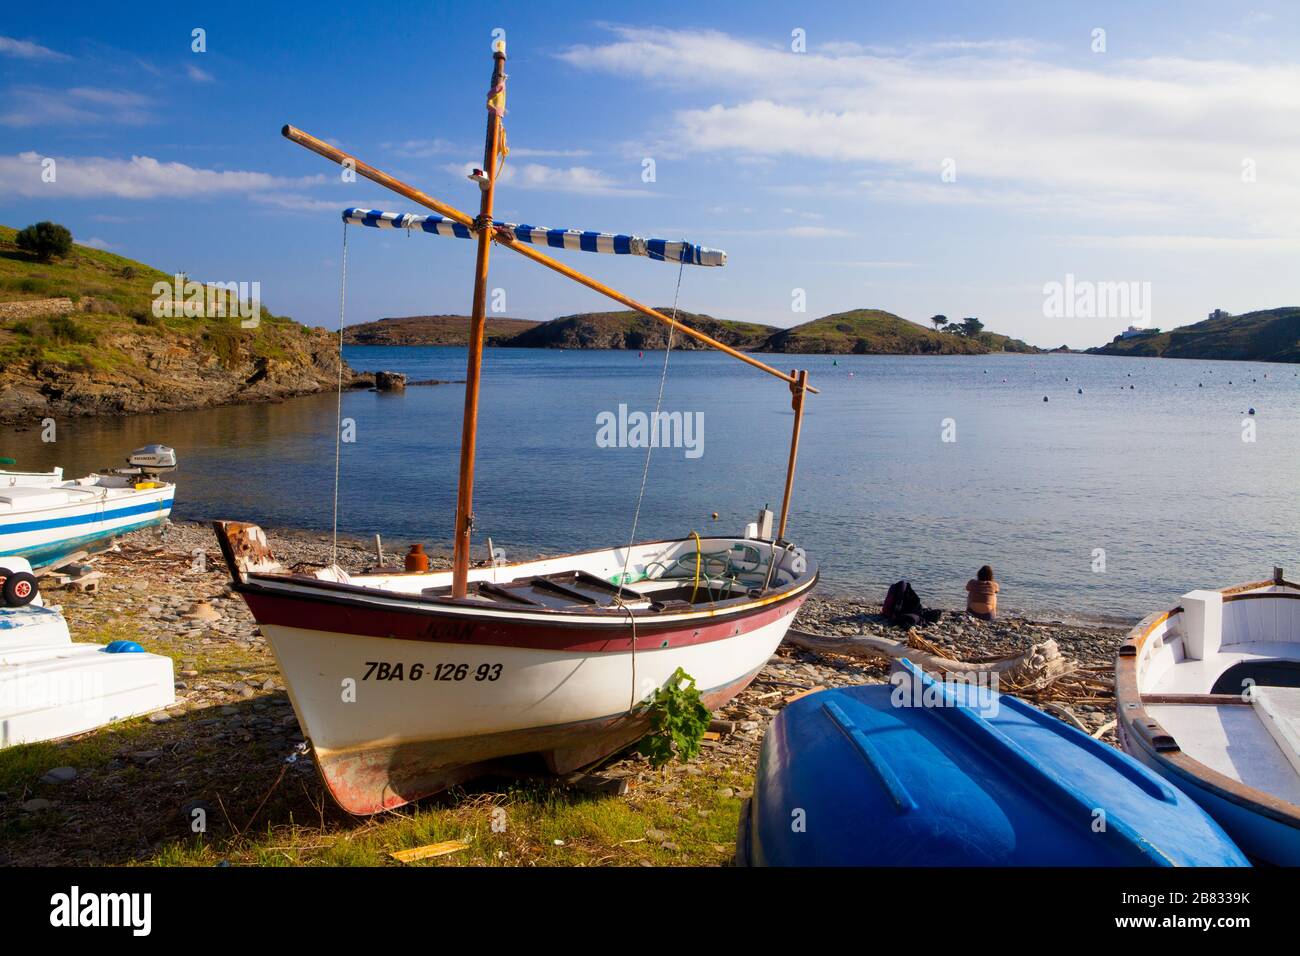 Some boats standing on the shore of Port Lligat village in Costa Brava, Girona, Spain. Stock Photo